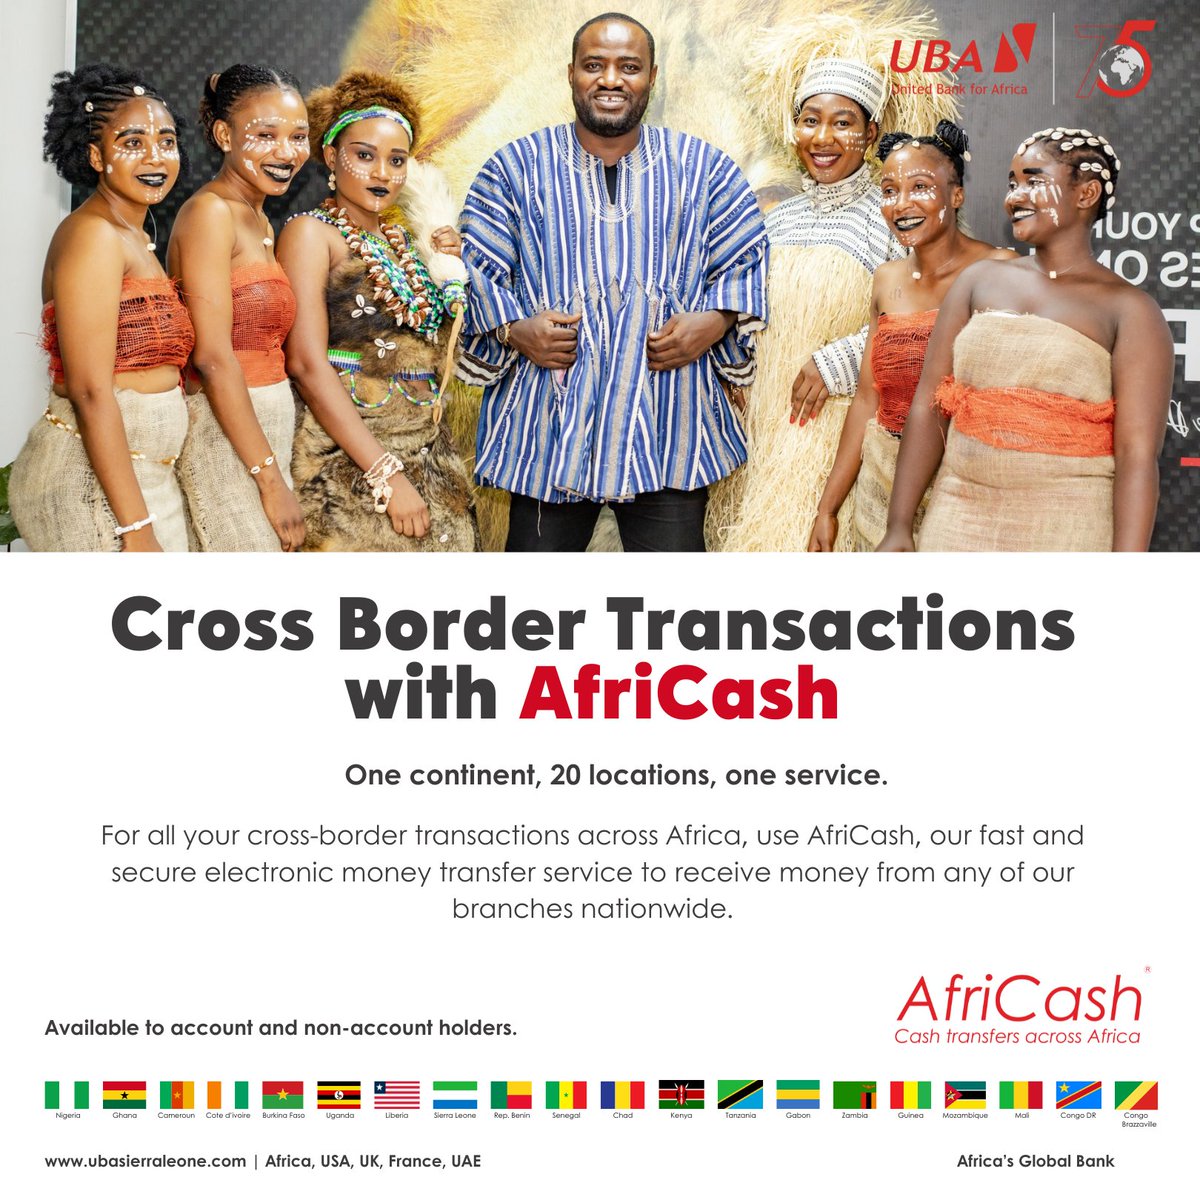 Effortlessly transfer funds with AfriCash. Accessible across the 20 African countries where UBA operates, ensuring fast and smooth transactions. 

#AfriCash #MoneyTransfer #AfricasGlobalBank